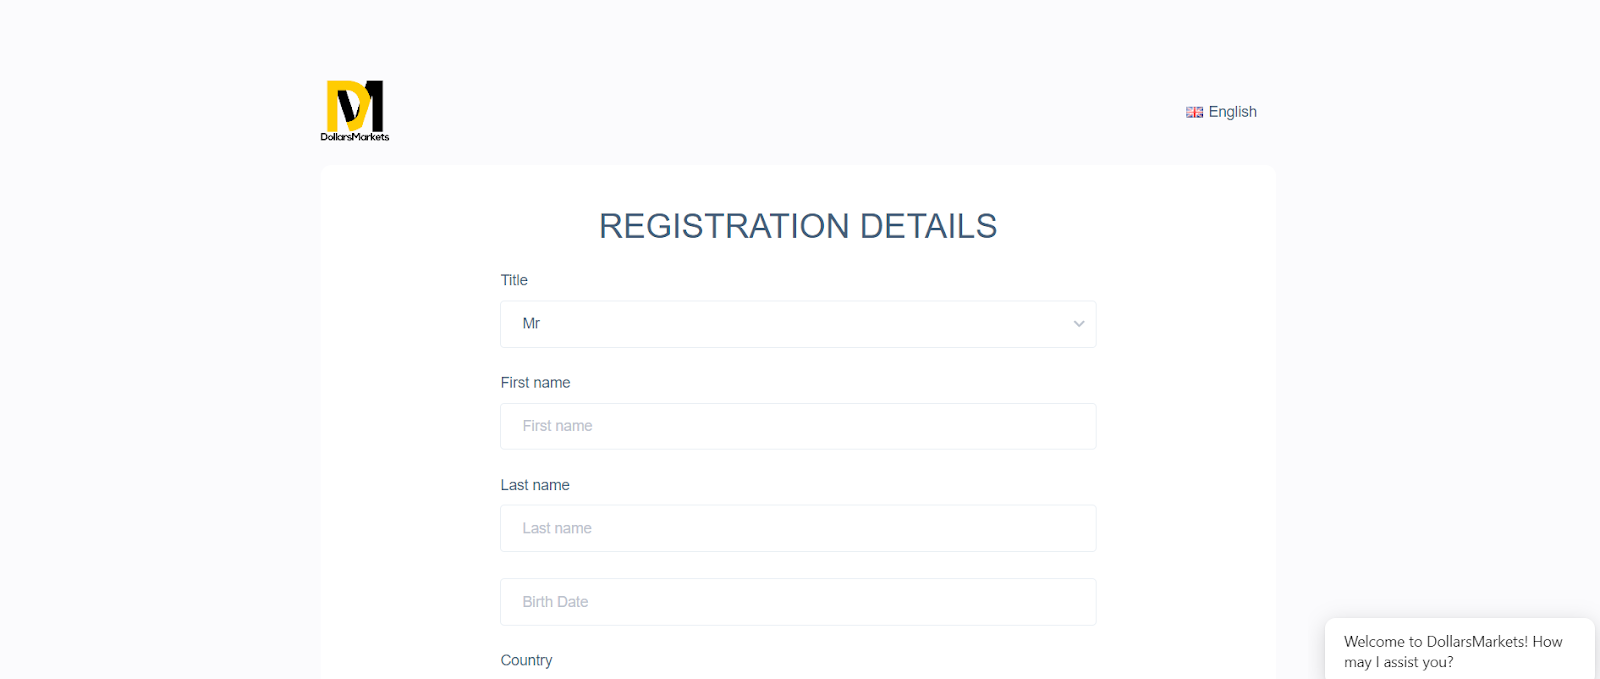 Review of Dollars Markets’ User Account — Registration